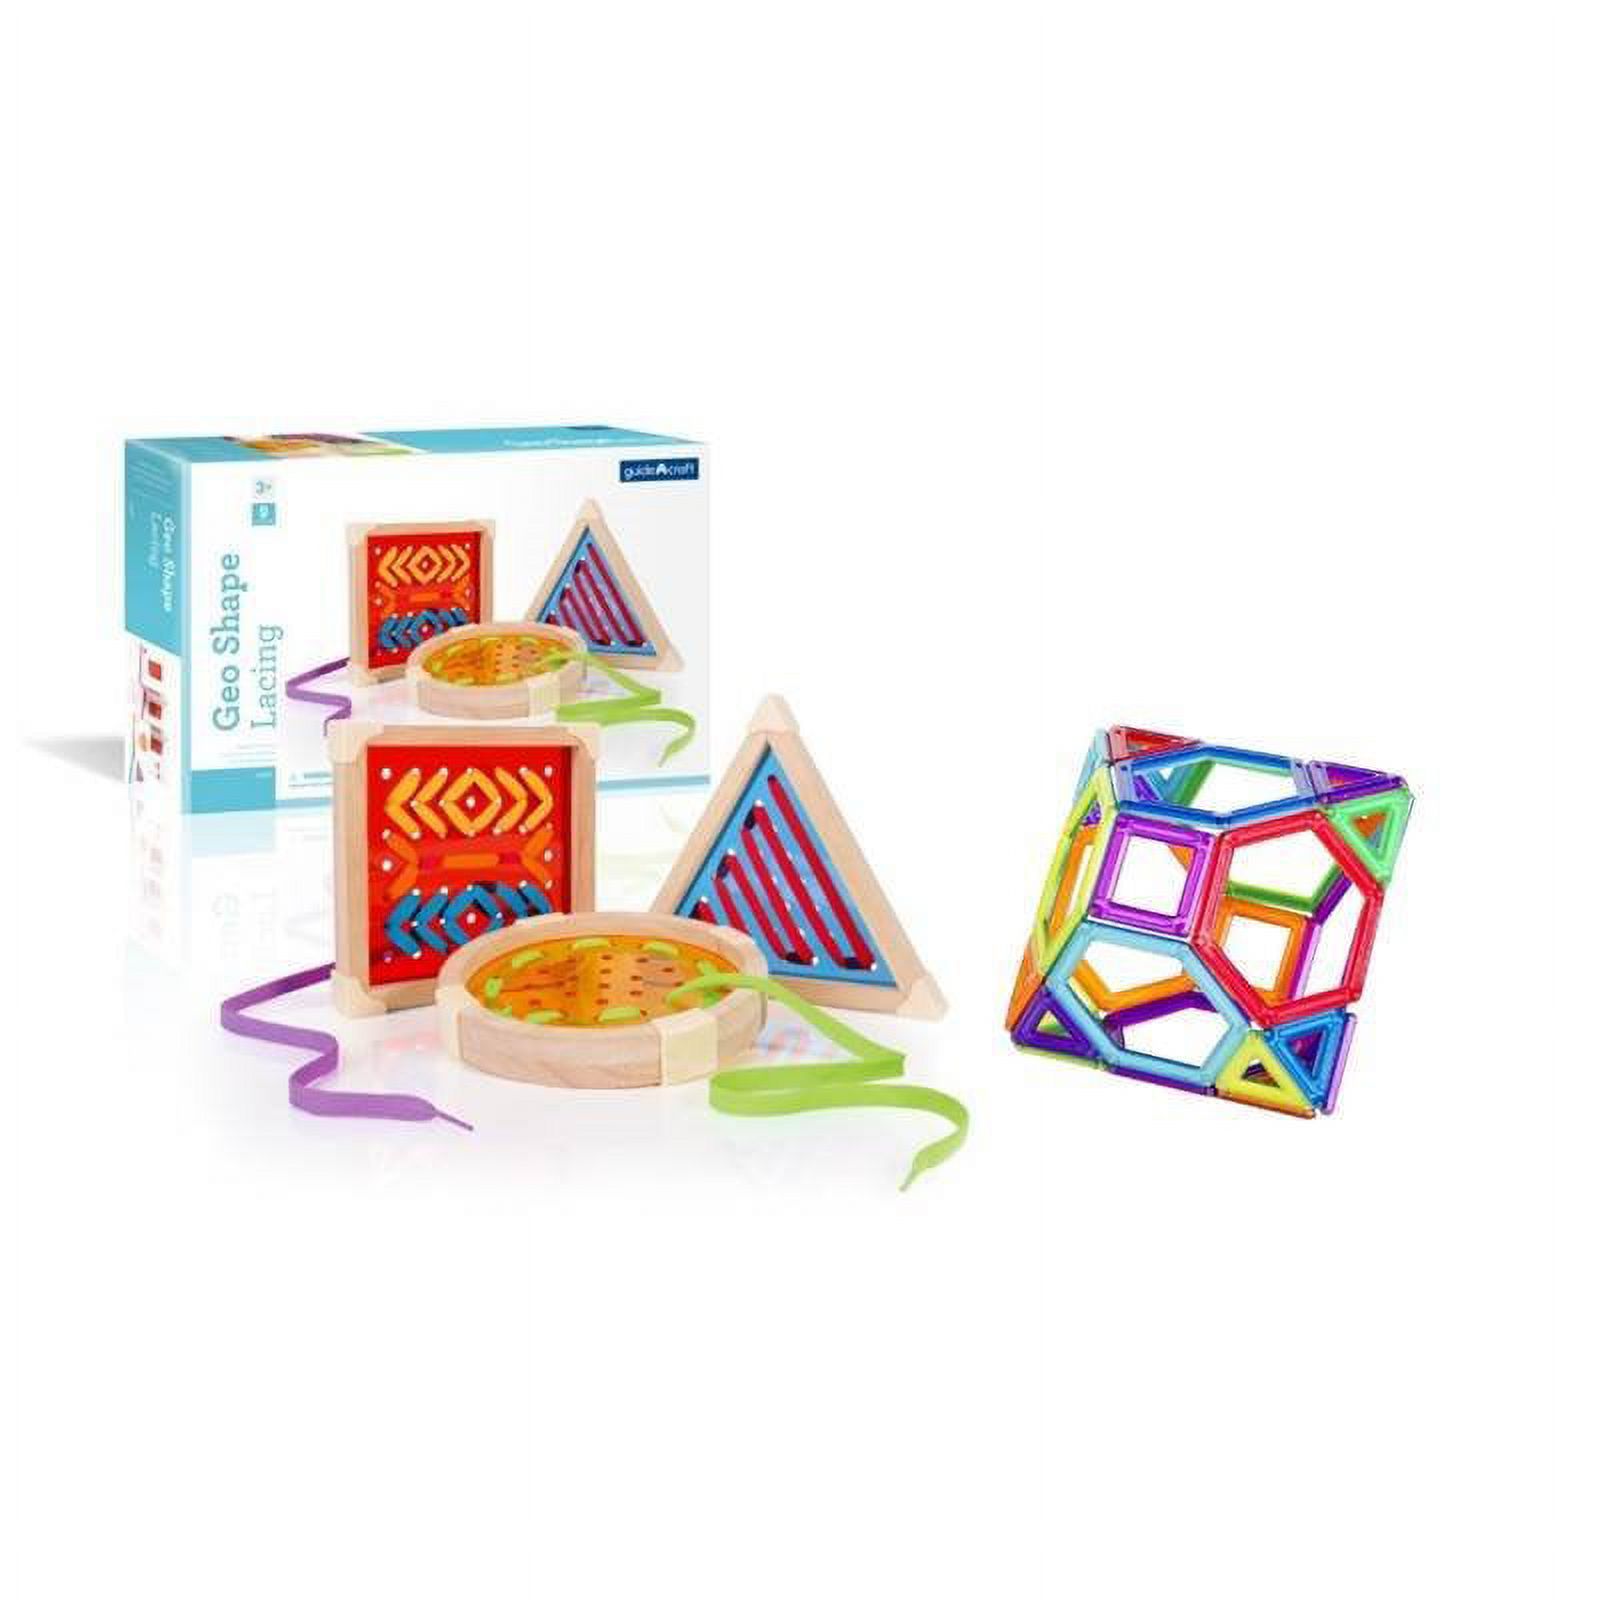 Colorful Kids Toys Set - image 1 of 3